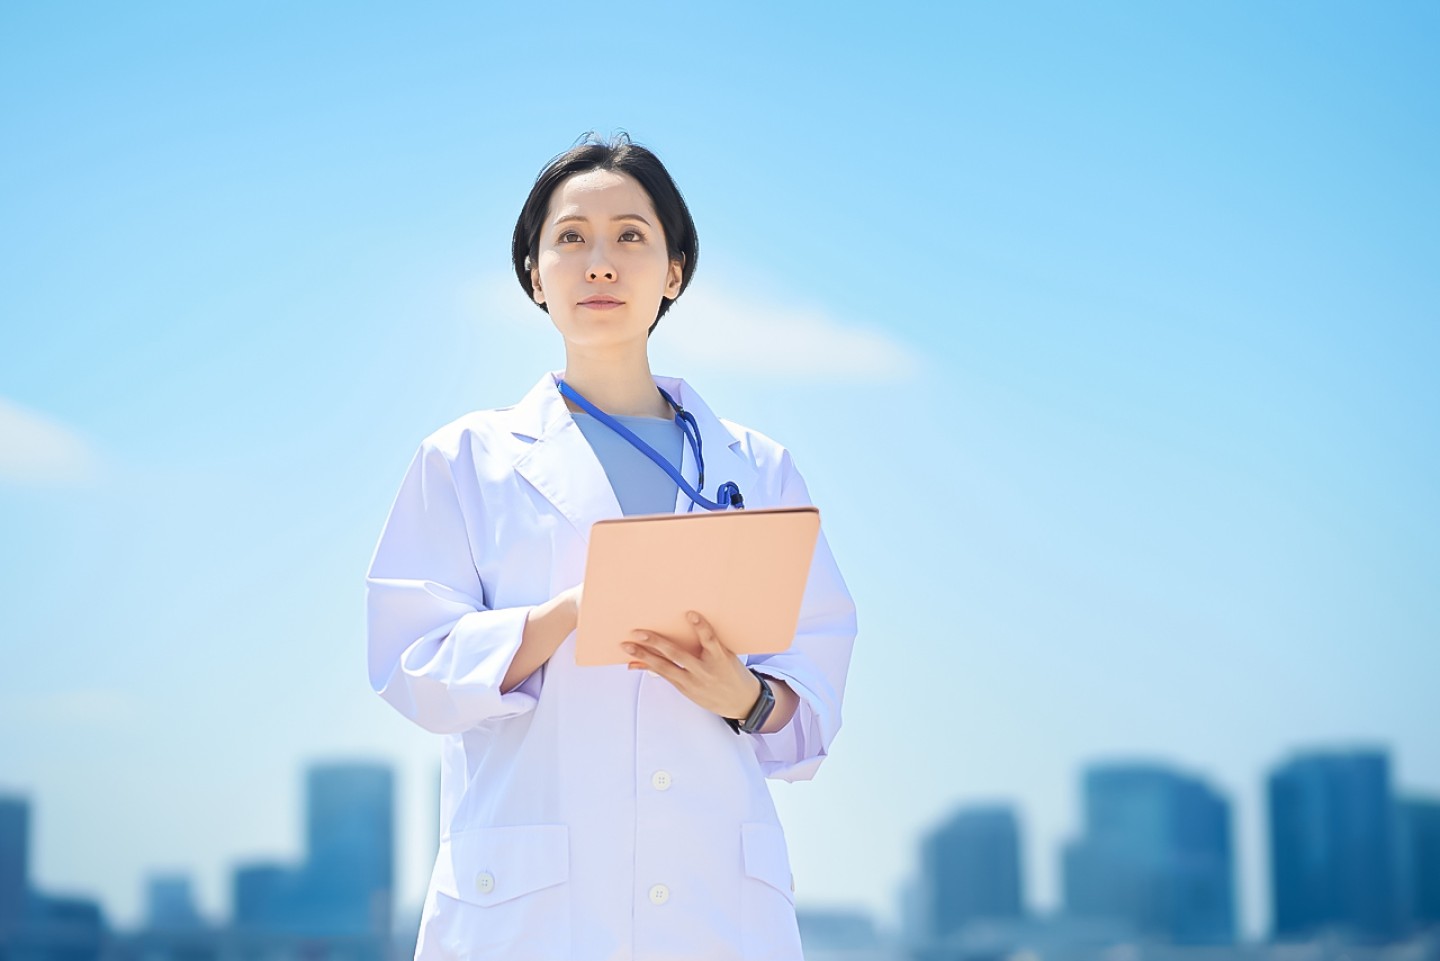 A woman in a white coat holding a file